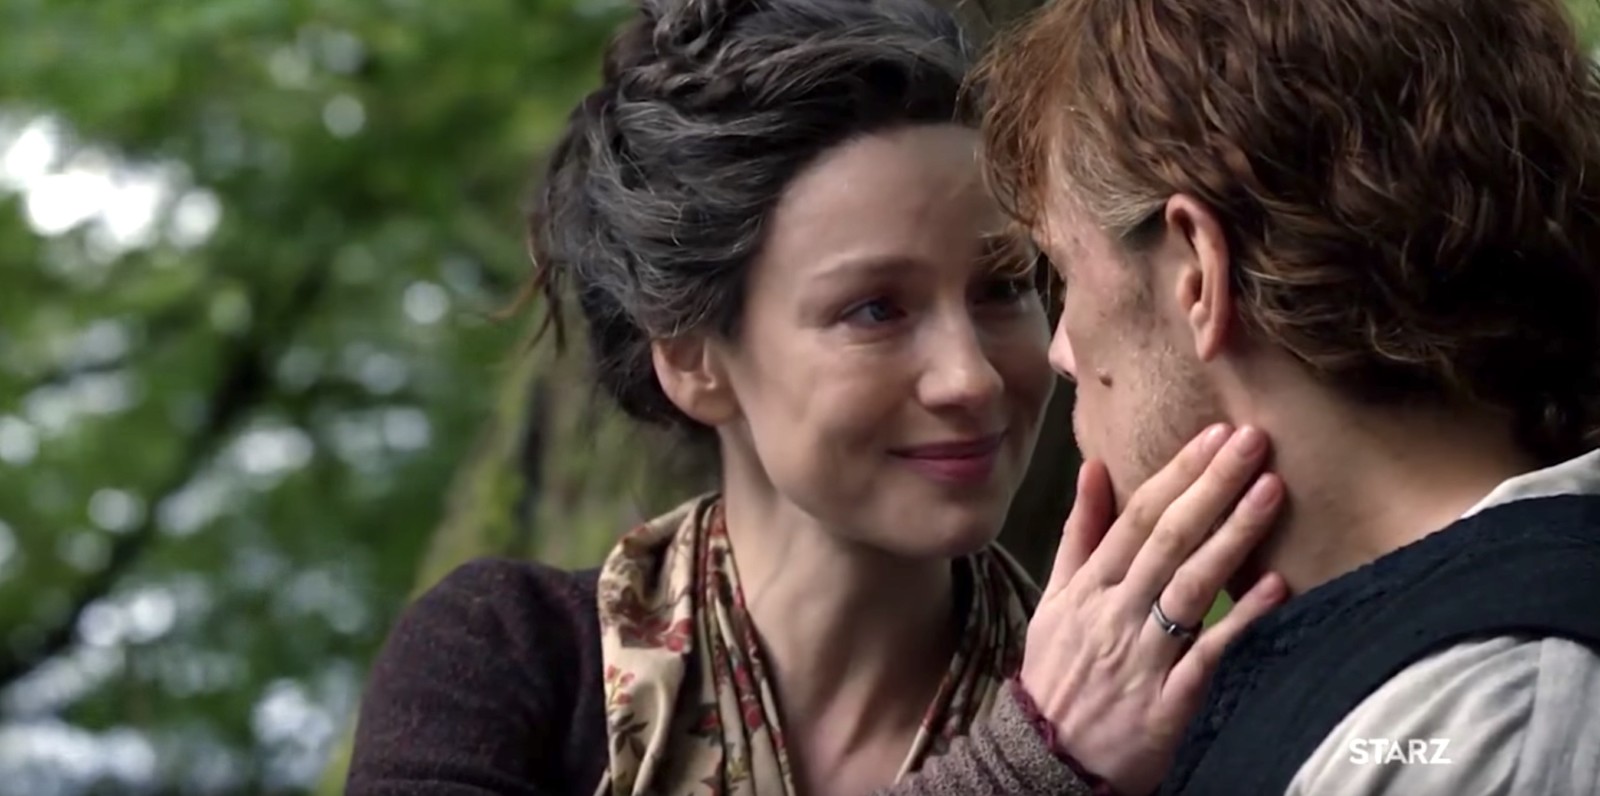 Fans Express Concerns about Season 4 in The Wake of Recent Publicity -  Outlander Behind the Scenes